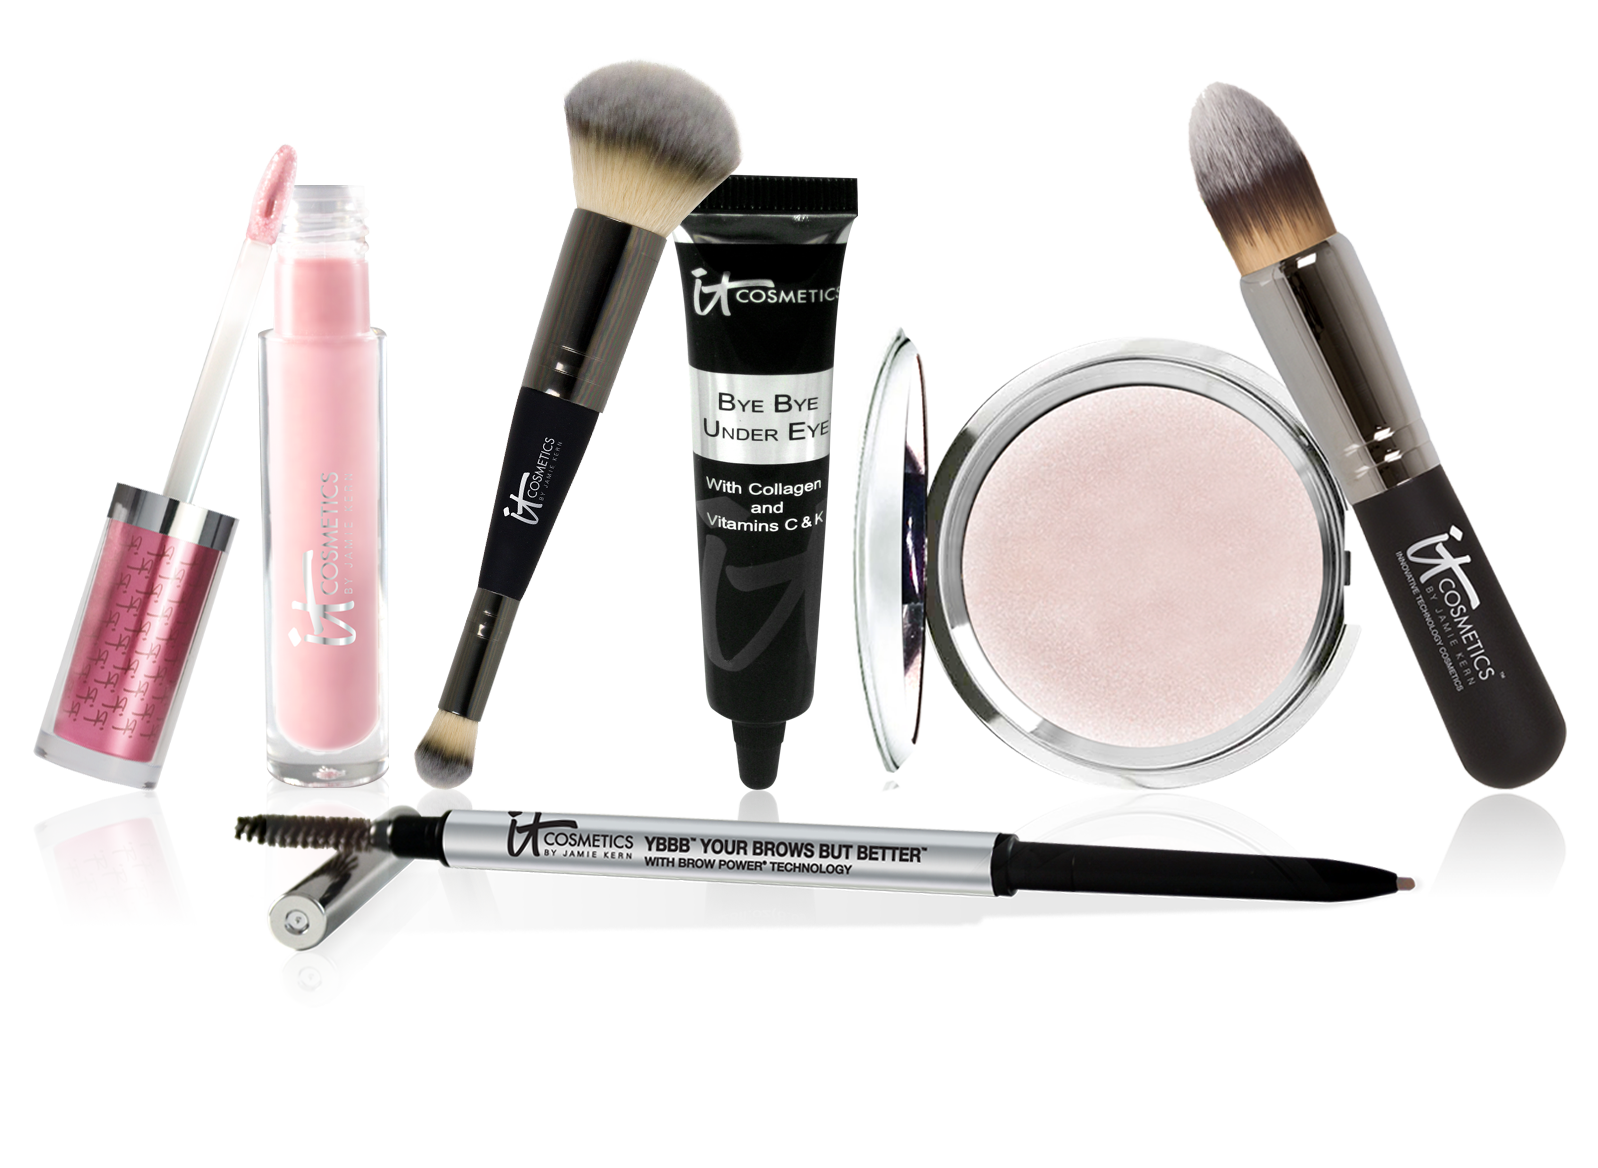 Your Most Beautiful You with iT Cosmetics, July 13th On QVC